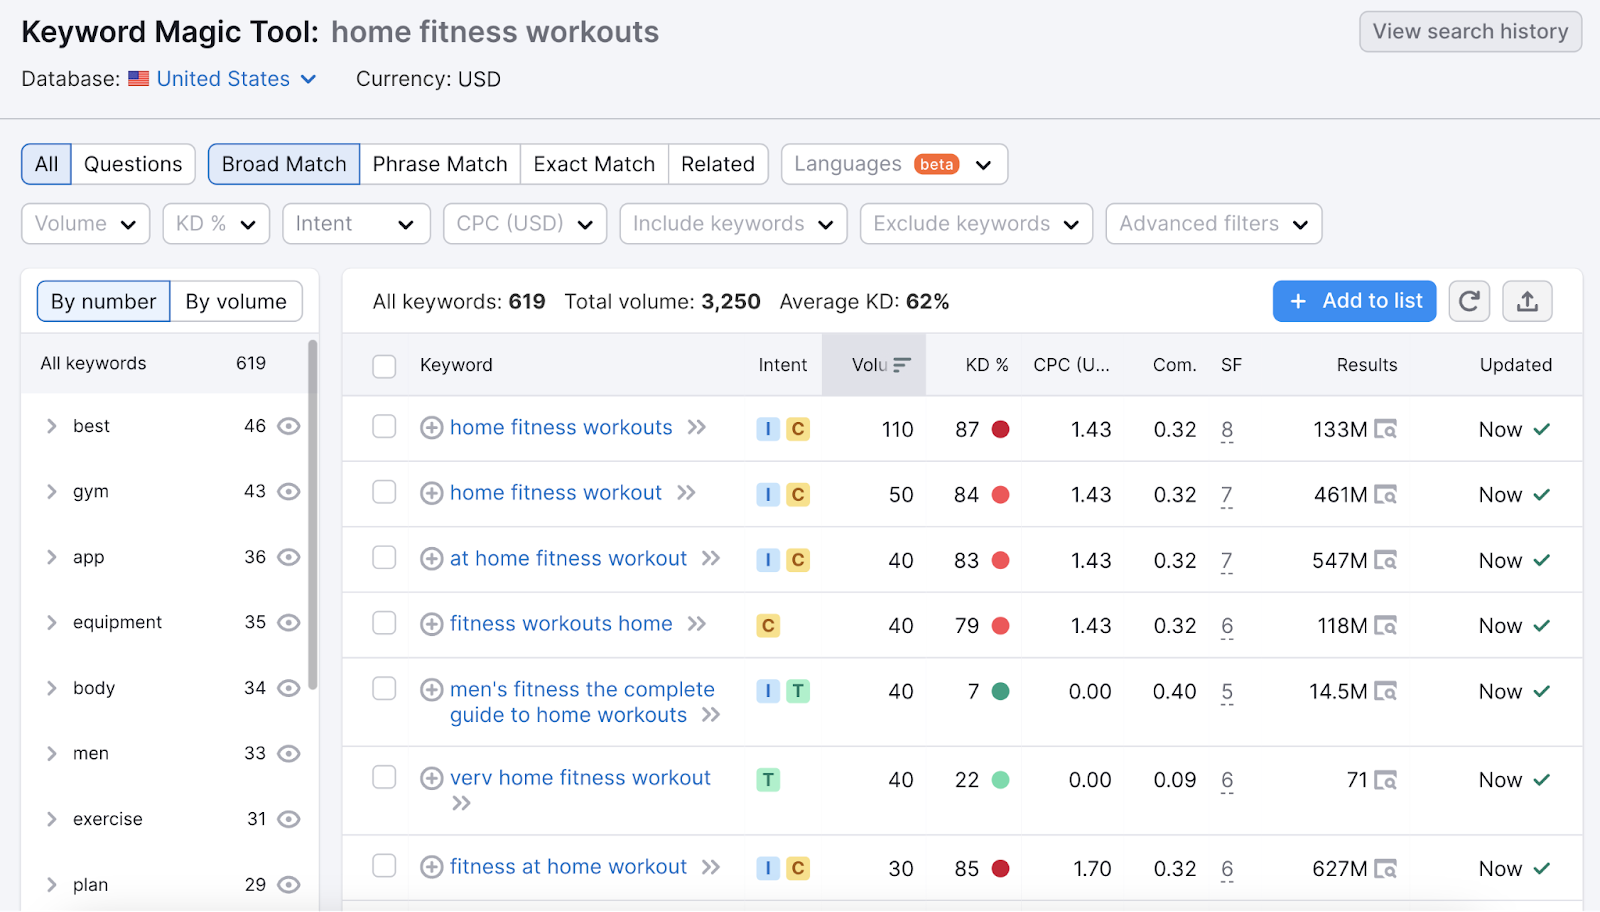 Keyword Magic Tool results for "home fitness workouts"